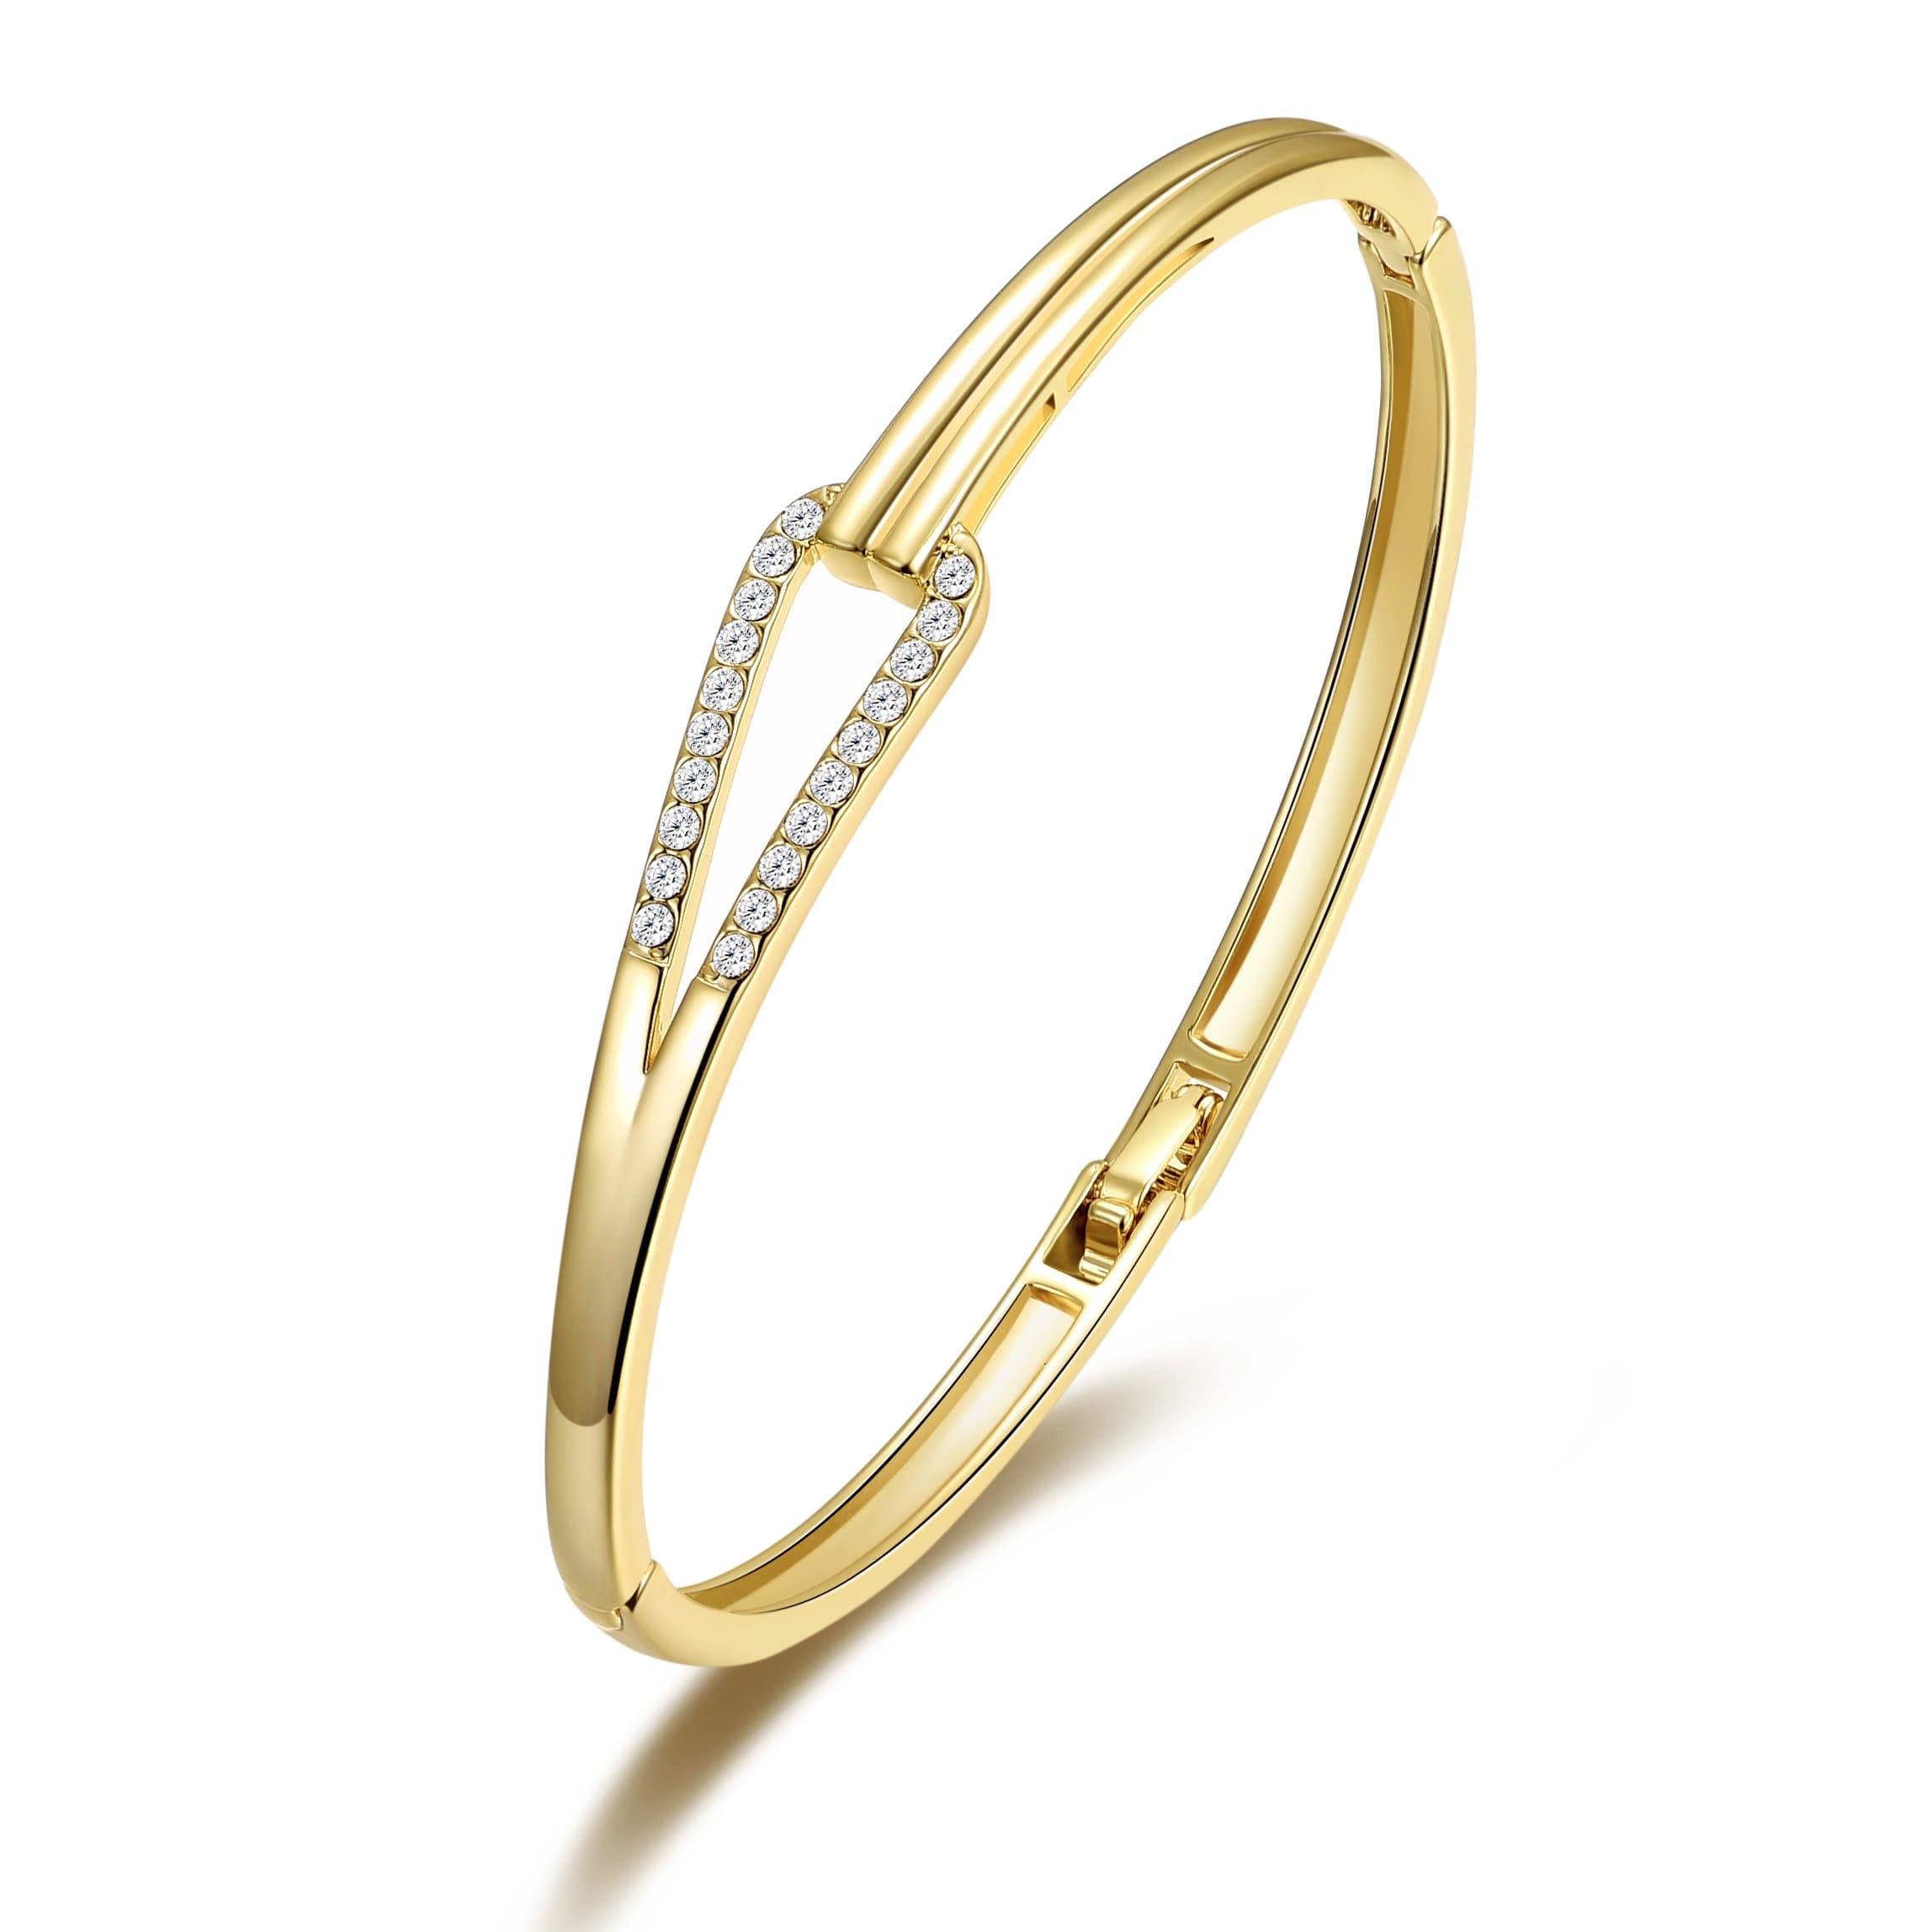 Quick & Practical Jewellery Design with RhinoGold - Celtic Bangle